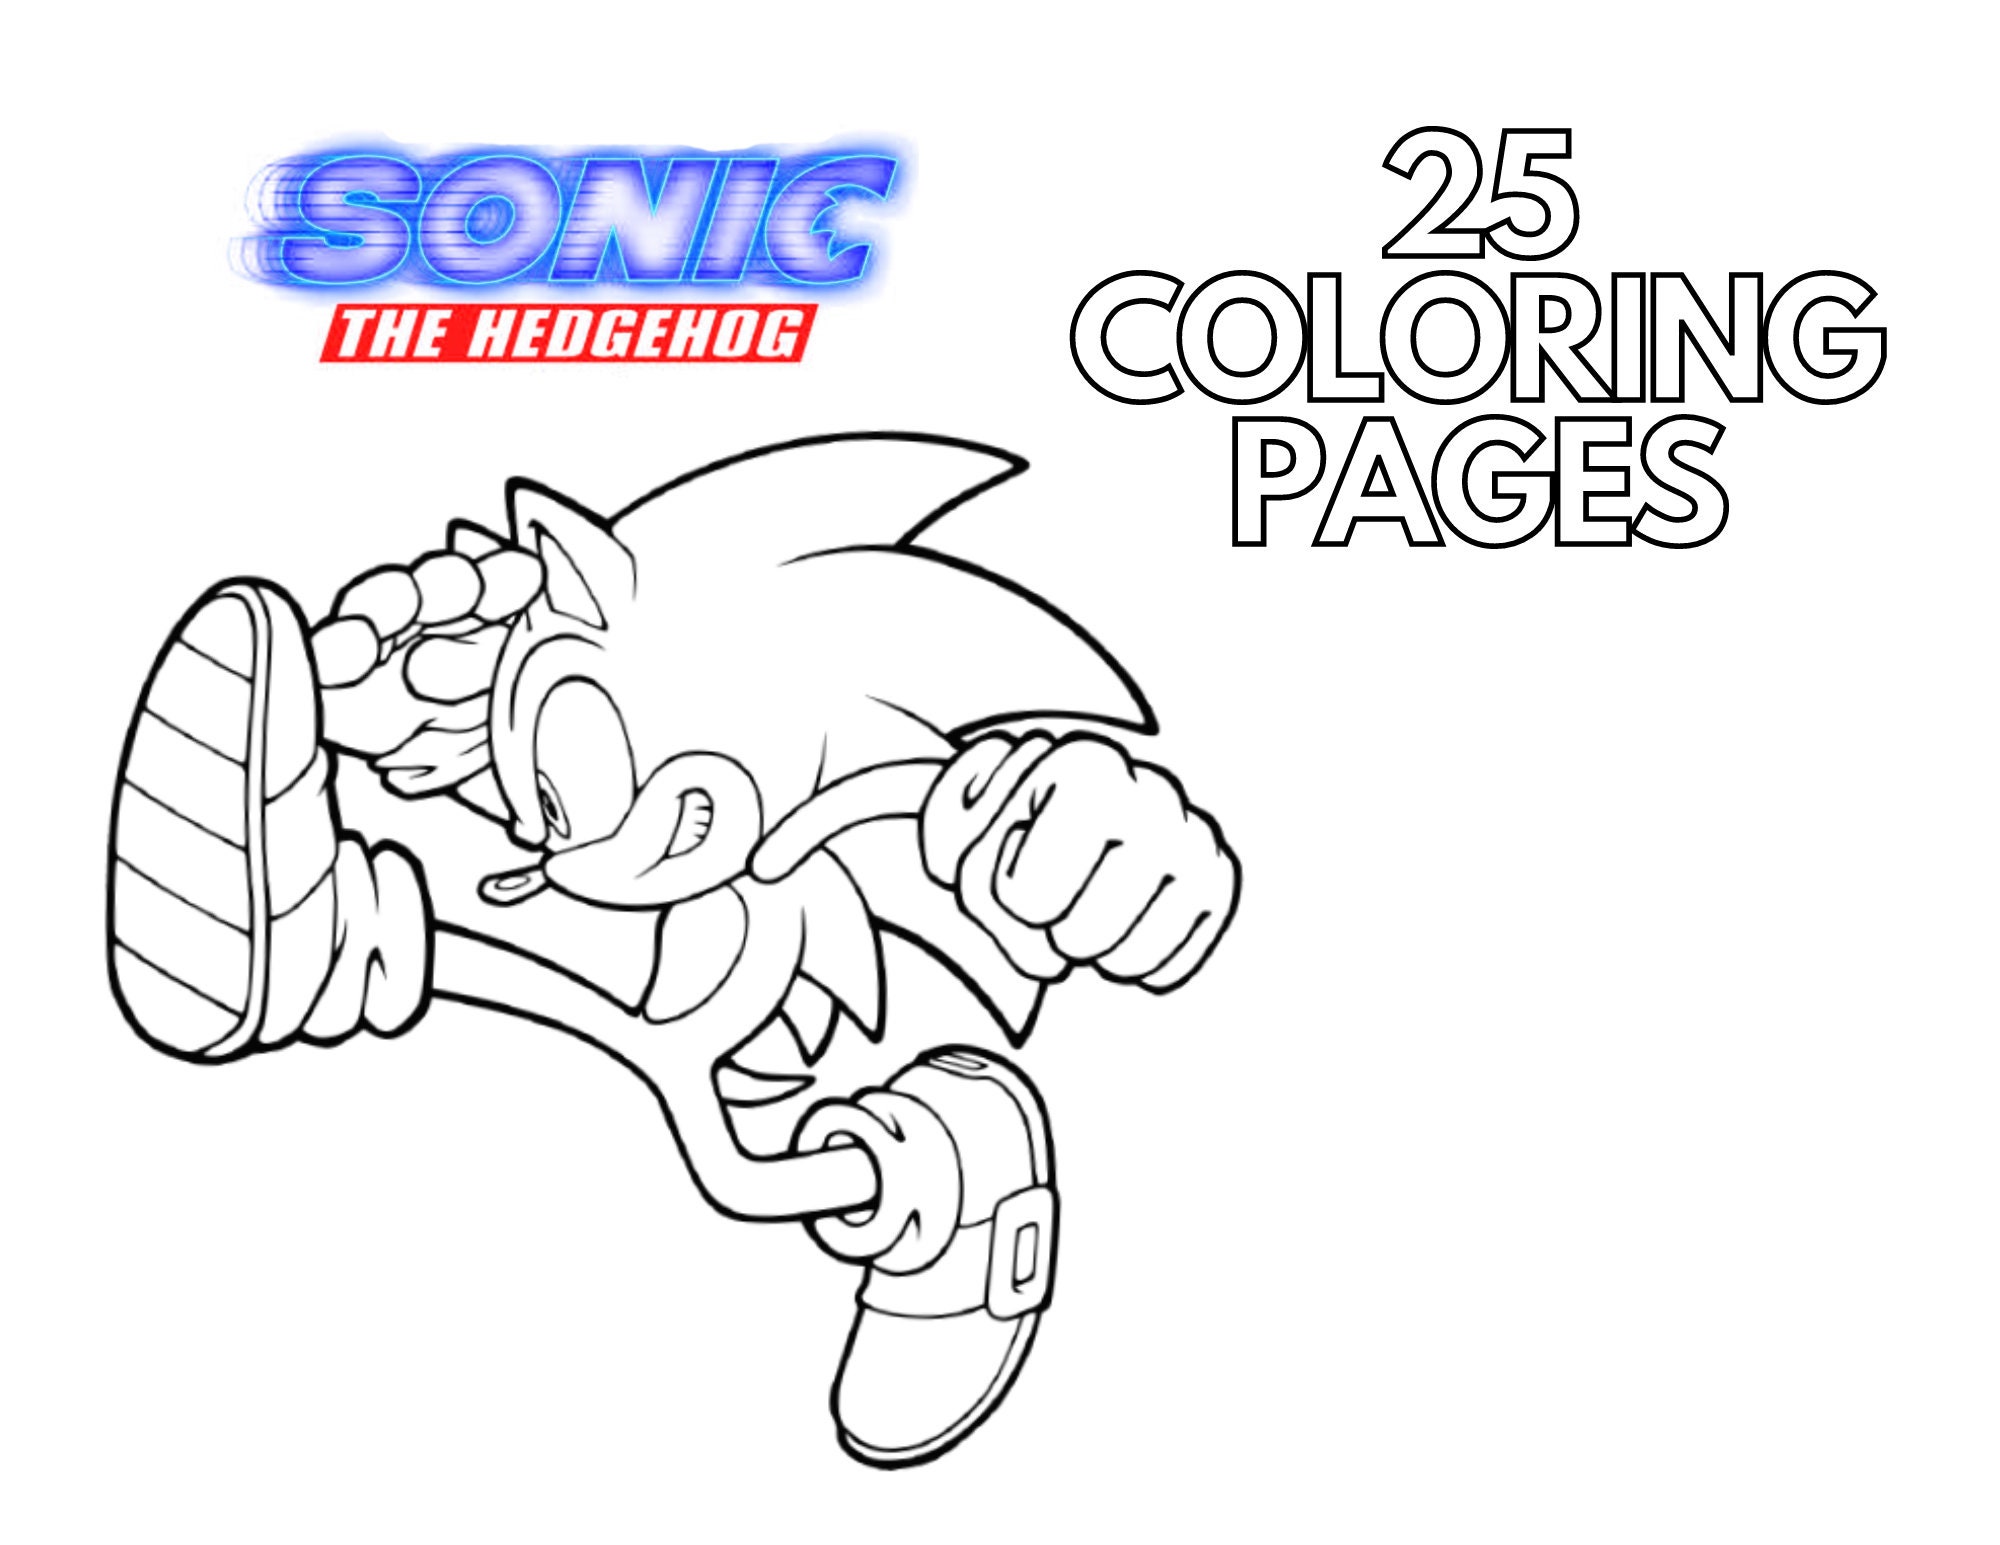  42Pack Sonic Coloring Books for Kids 4-8, Small